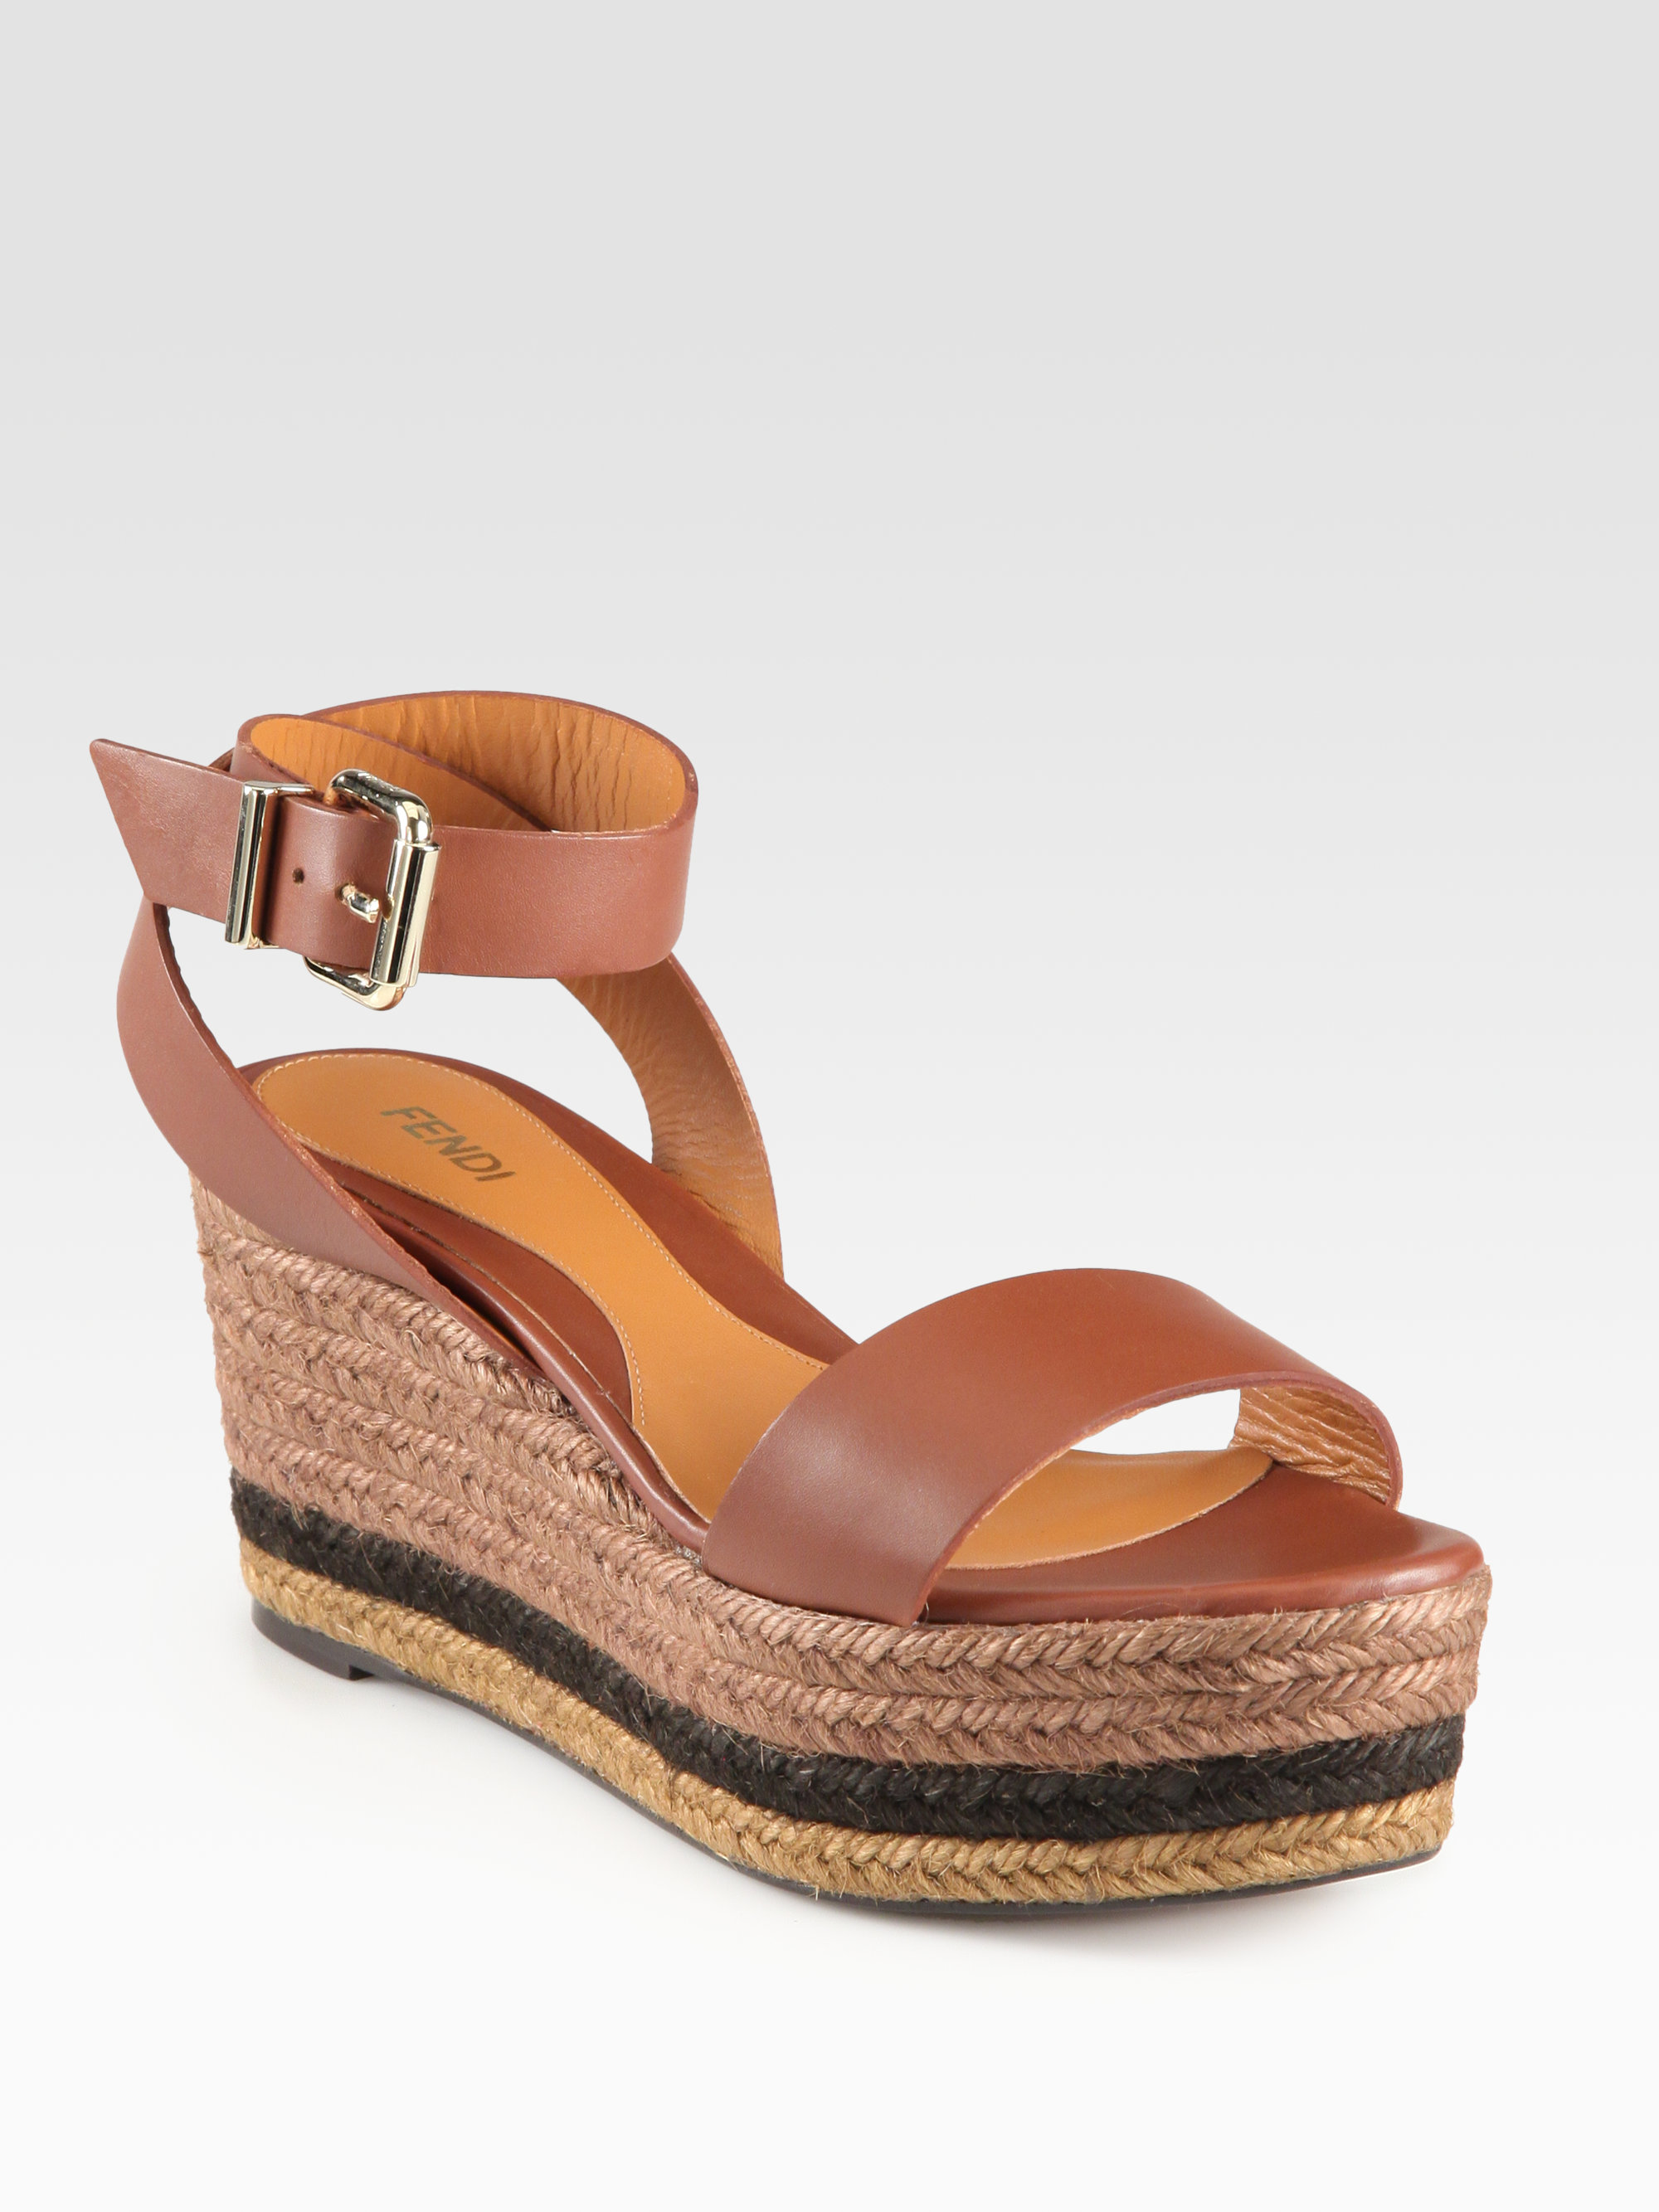 Fendi Pequin Leather Ankle Strap Espadrille Wedge Sandals in Brown ...